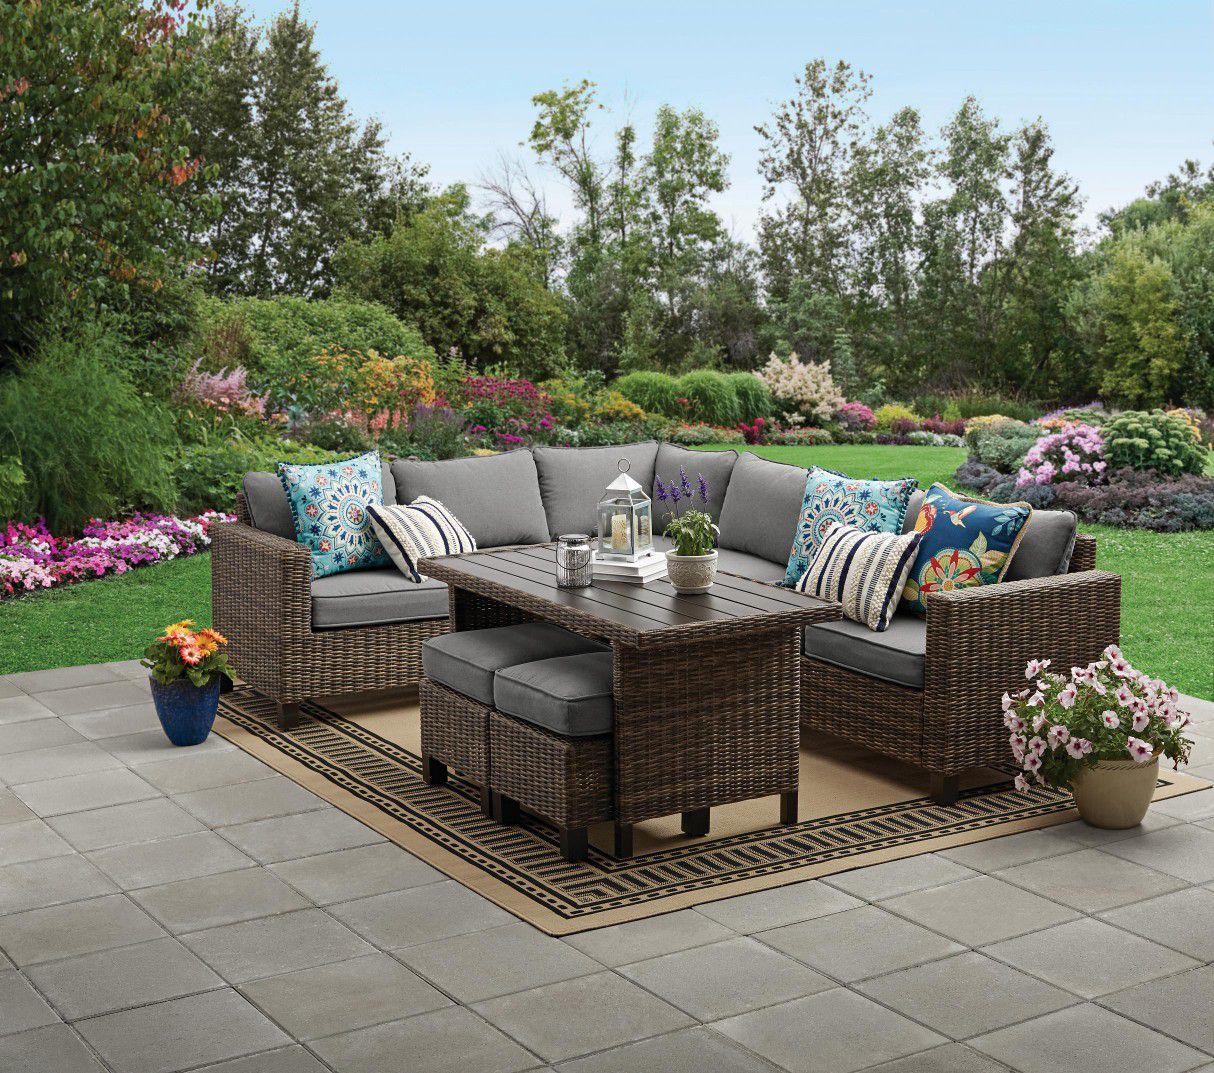 New in box! Better Homes & Gardens Brookbury 5-Piece Patio Wicker Sectional Set with Gray Cushions